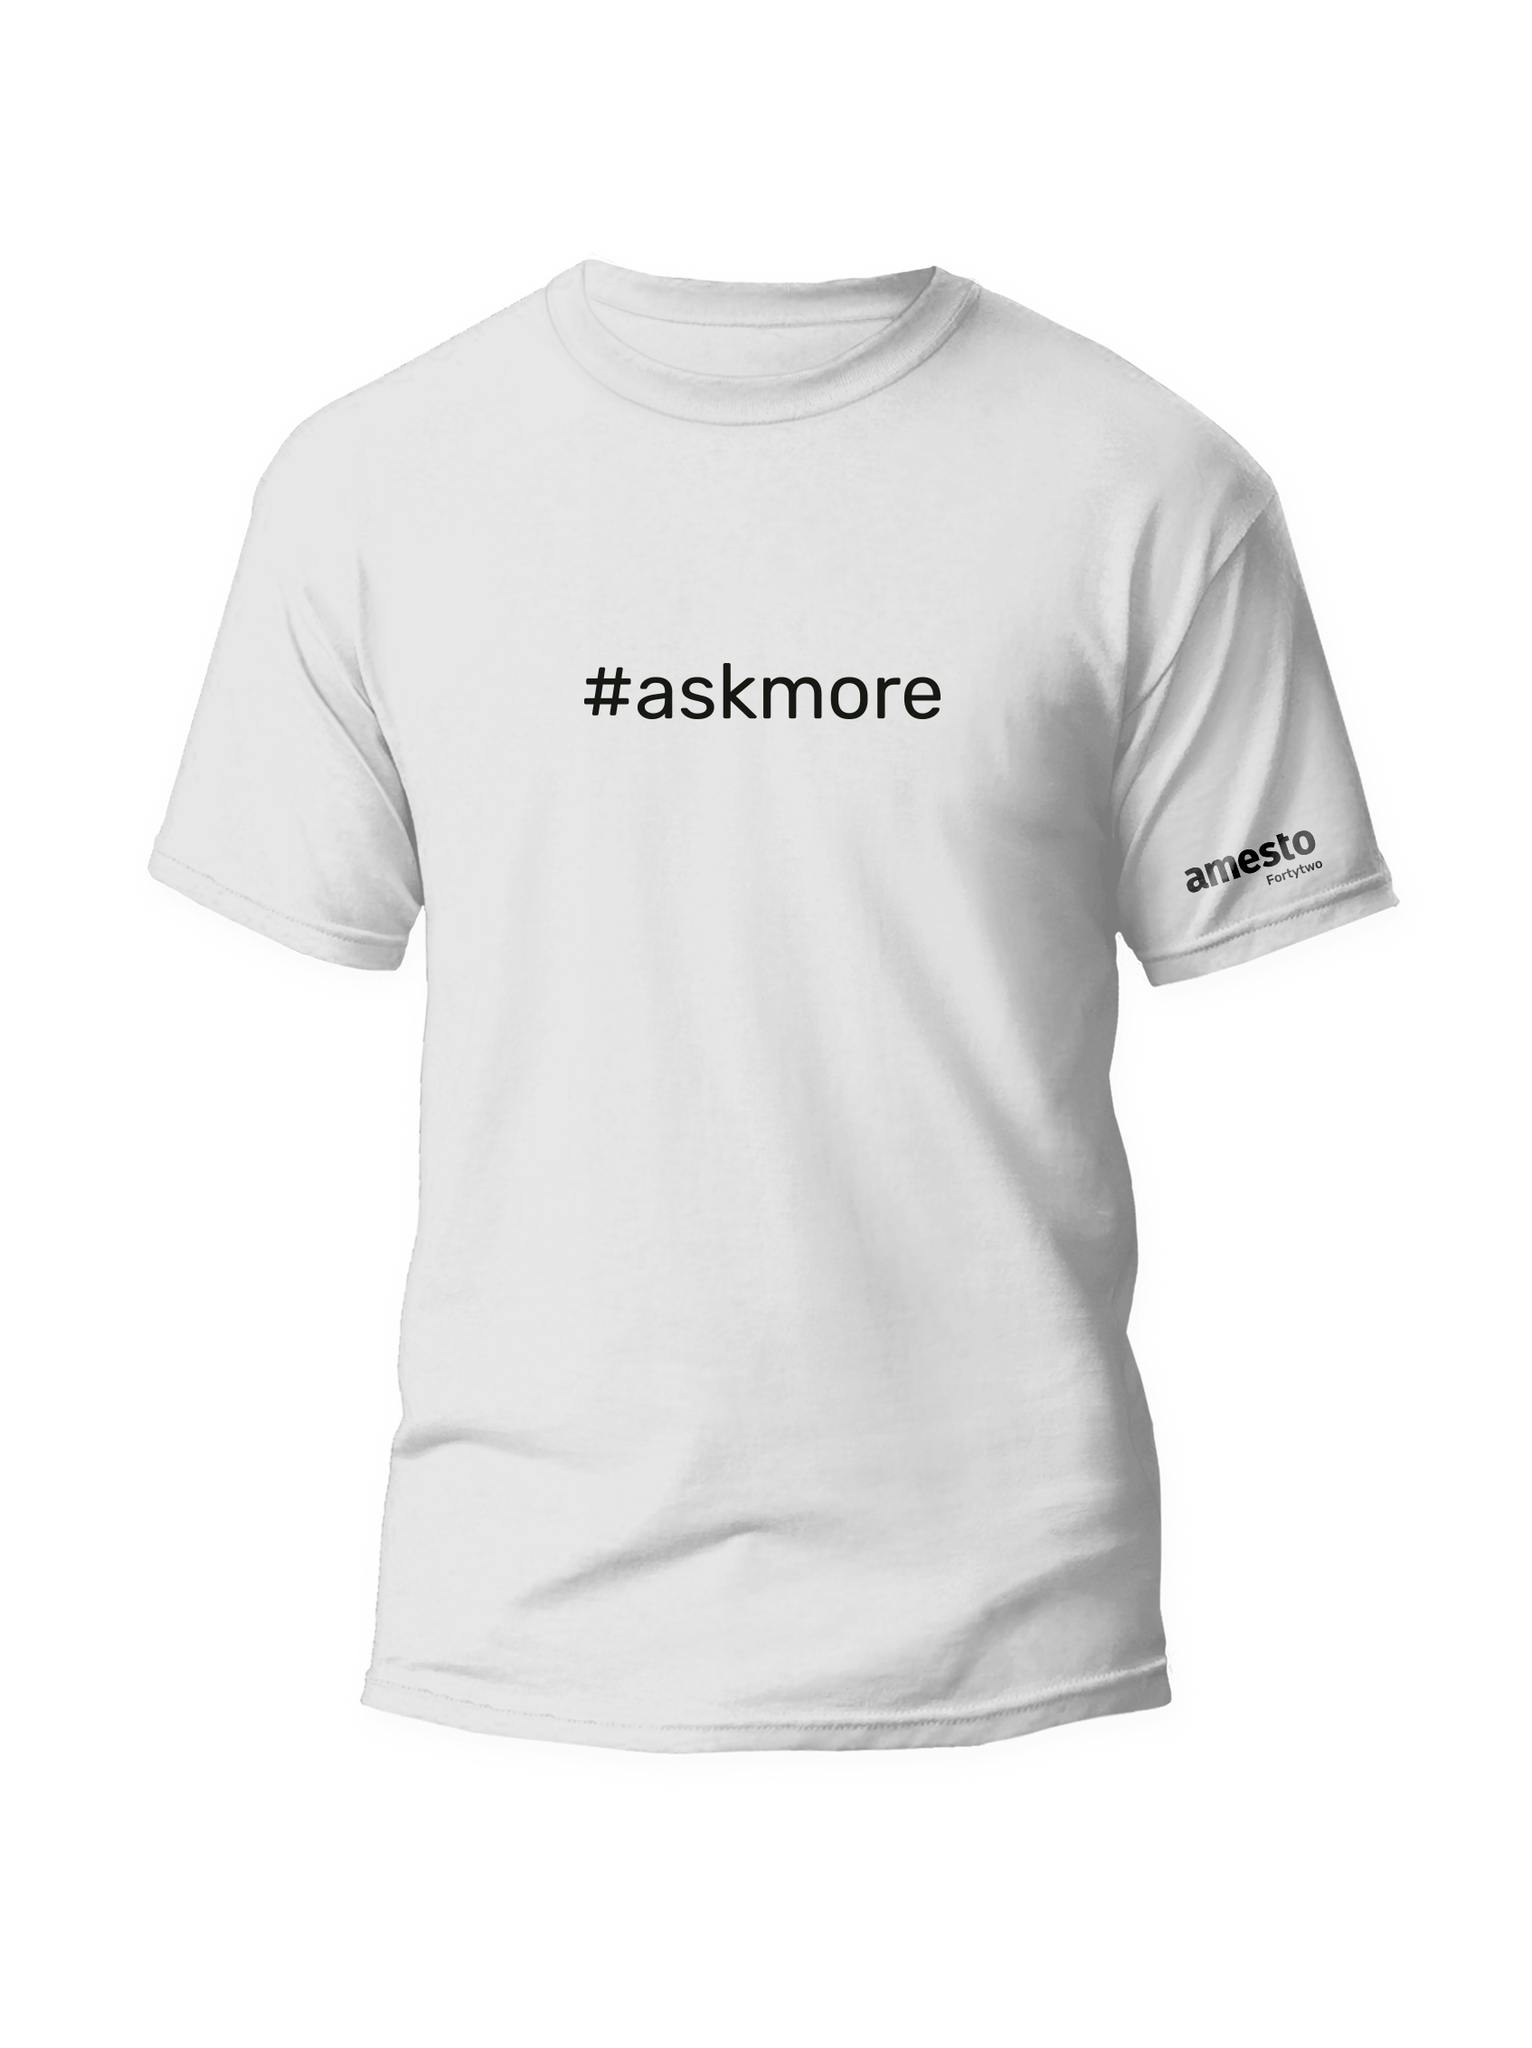 #askmore